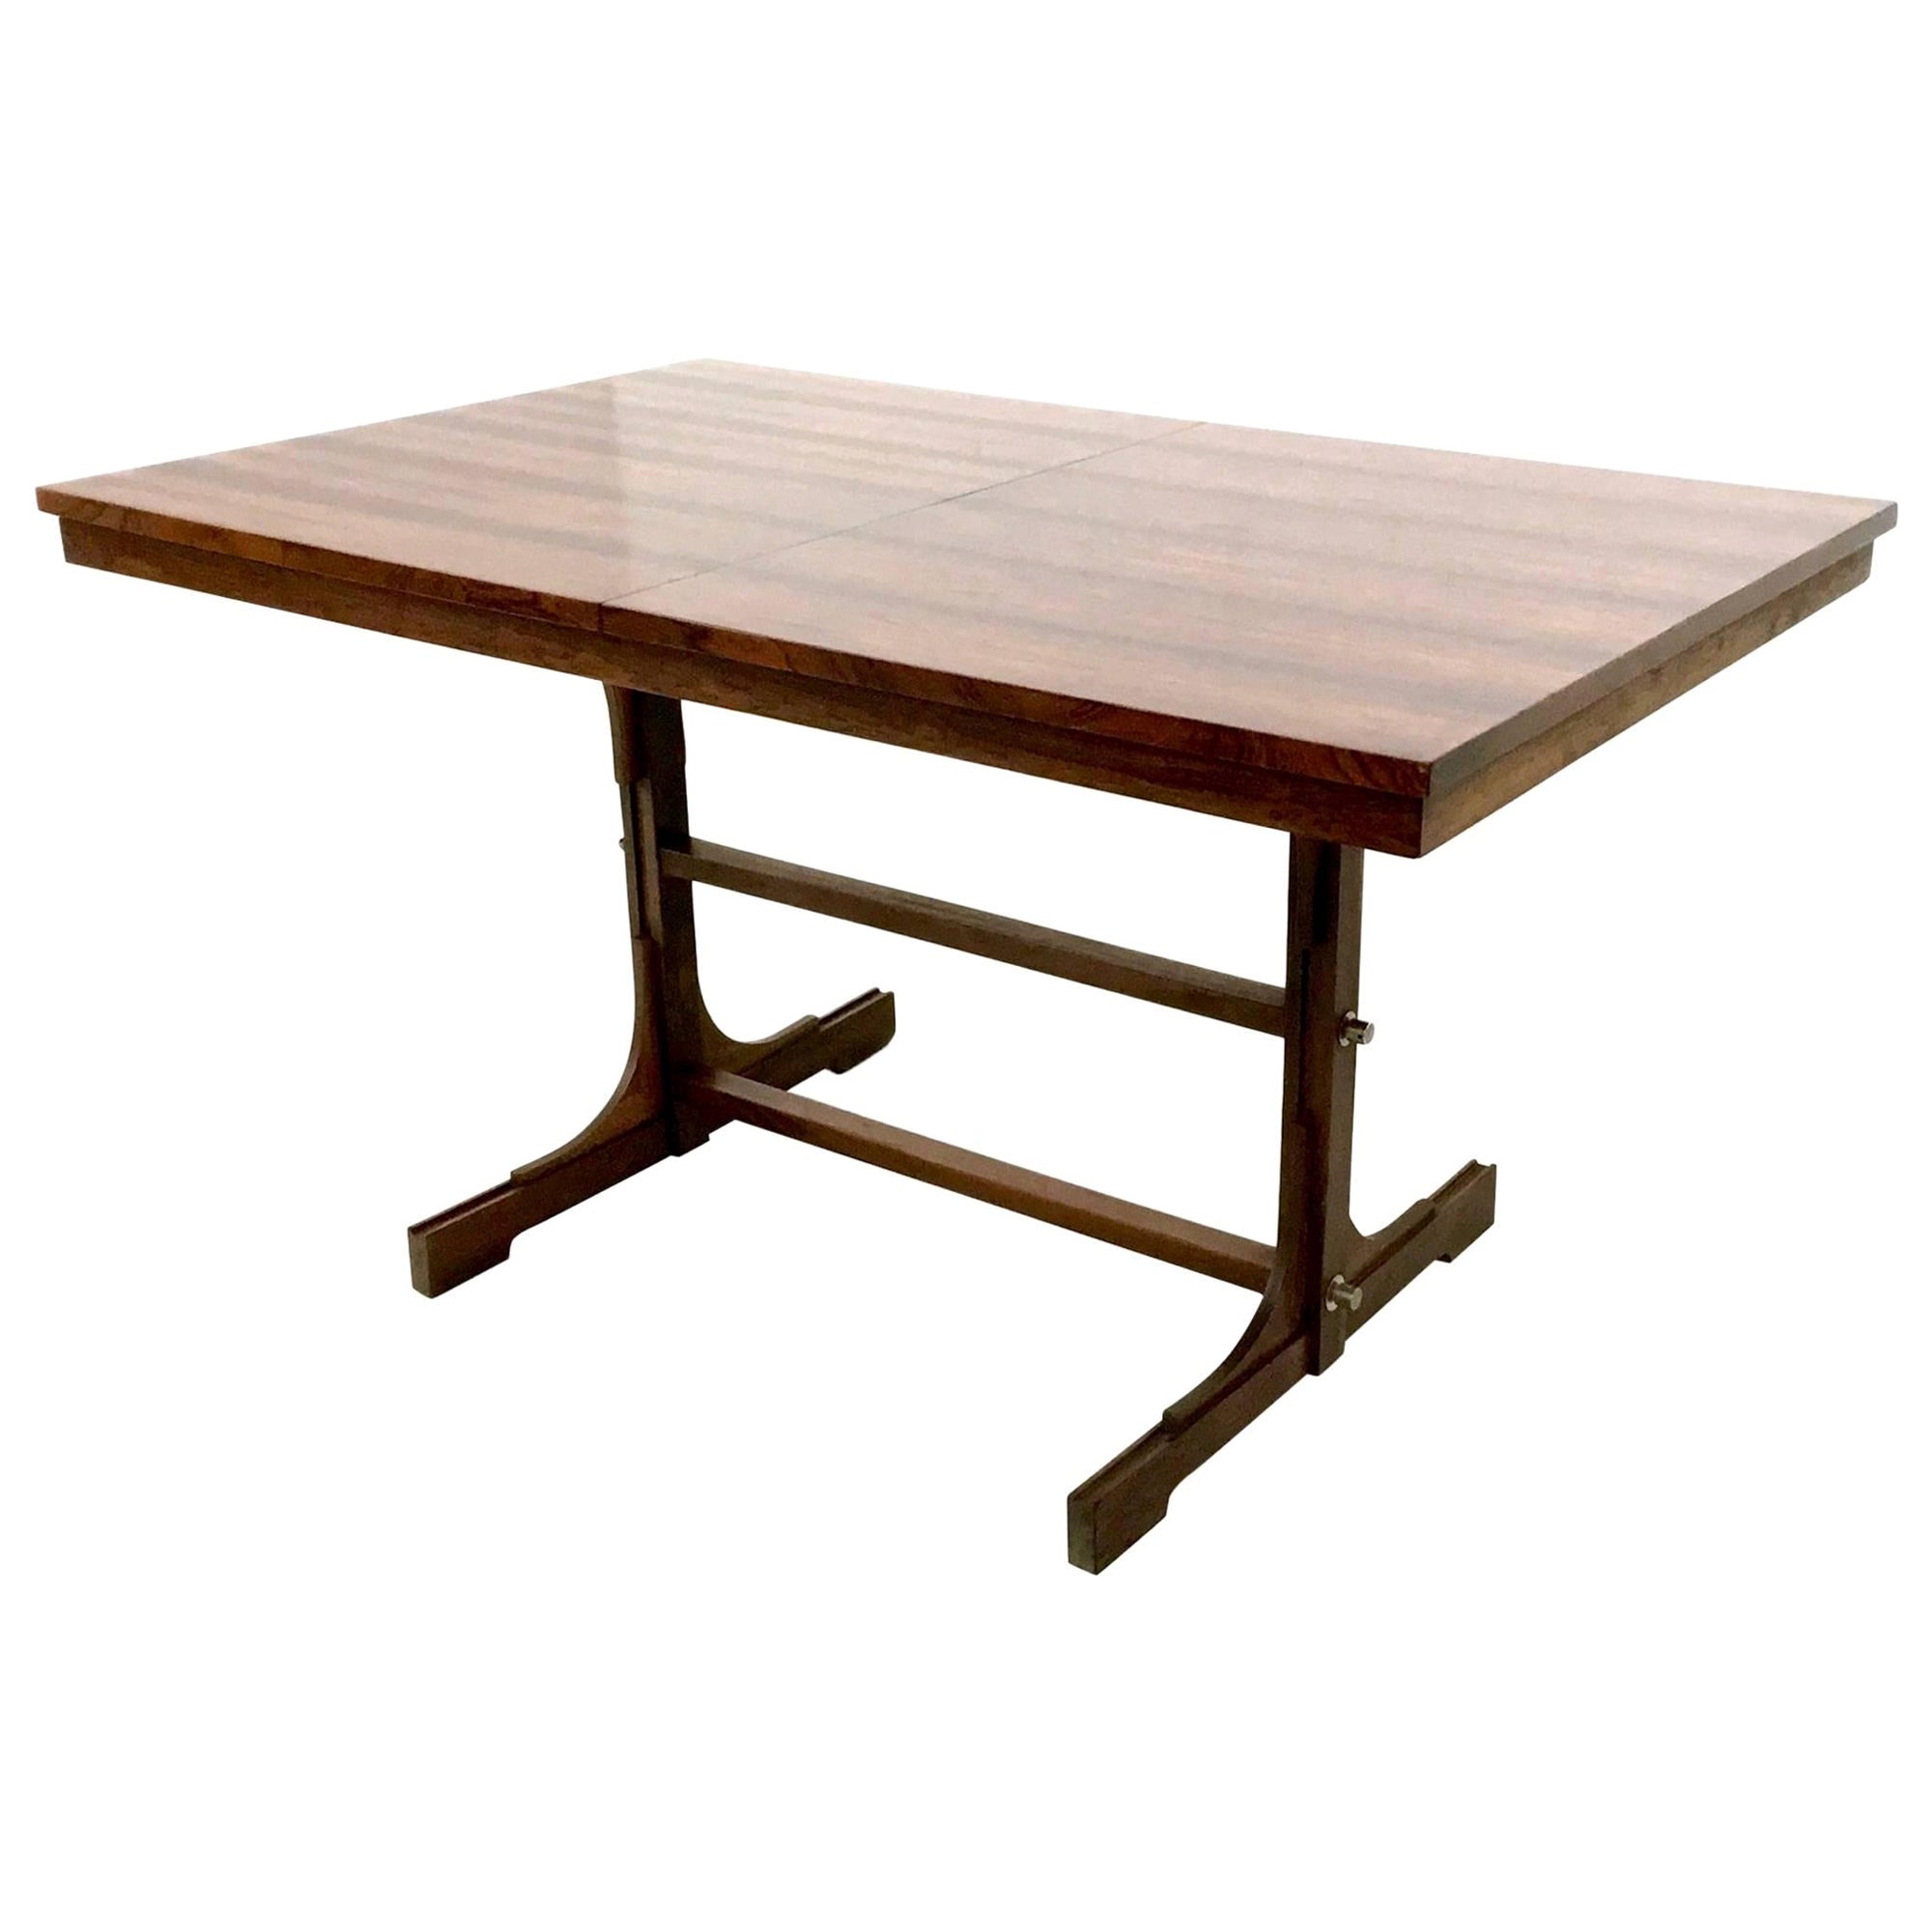 Midcentury Rectangular Wooden Extendible Dining Table, Italy